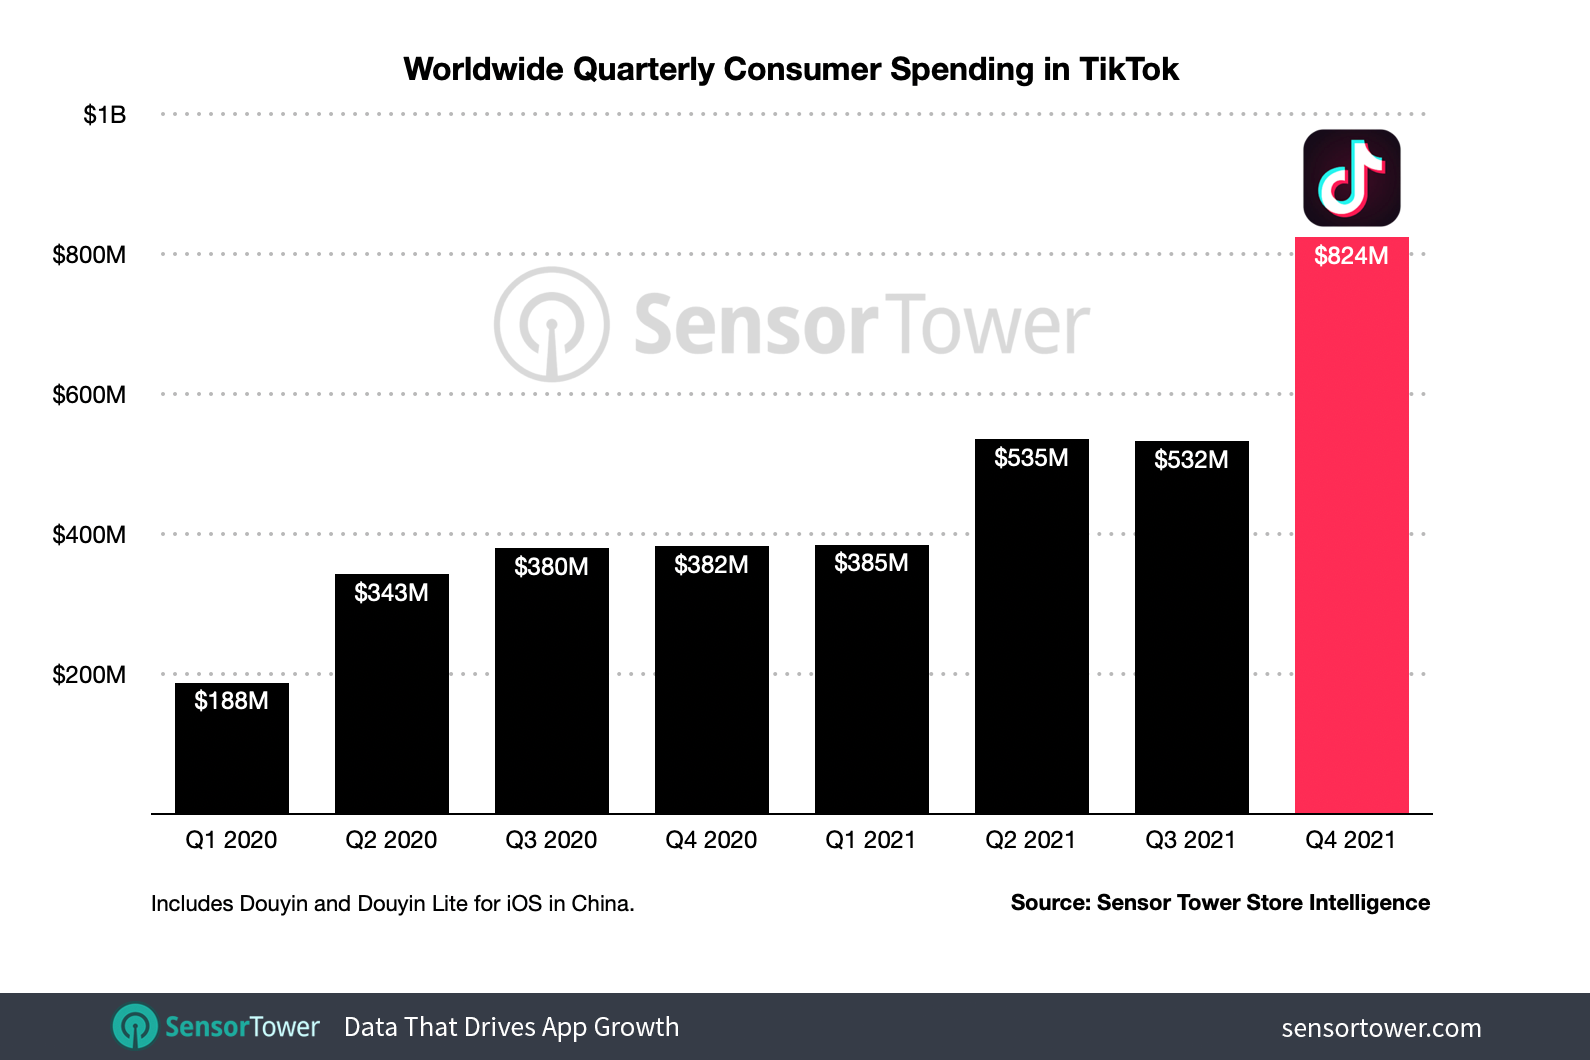 Global spending in TikTok has climbed fairly consistently each quarter.